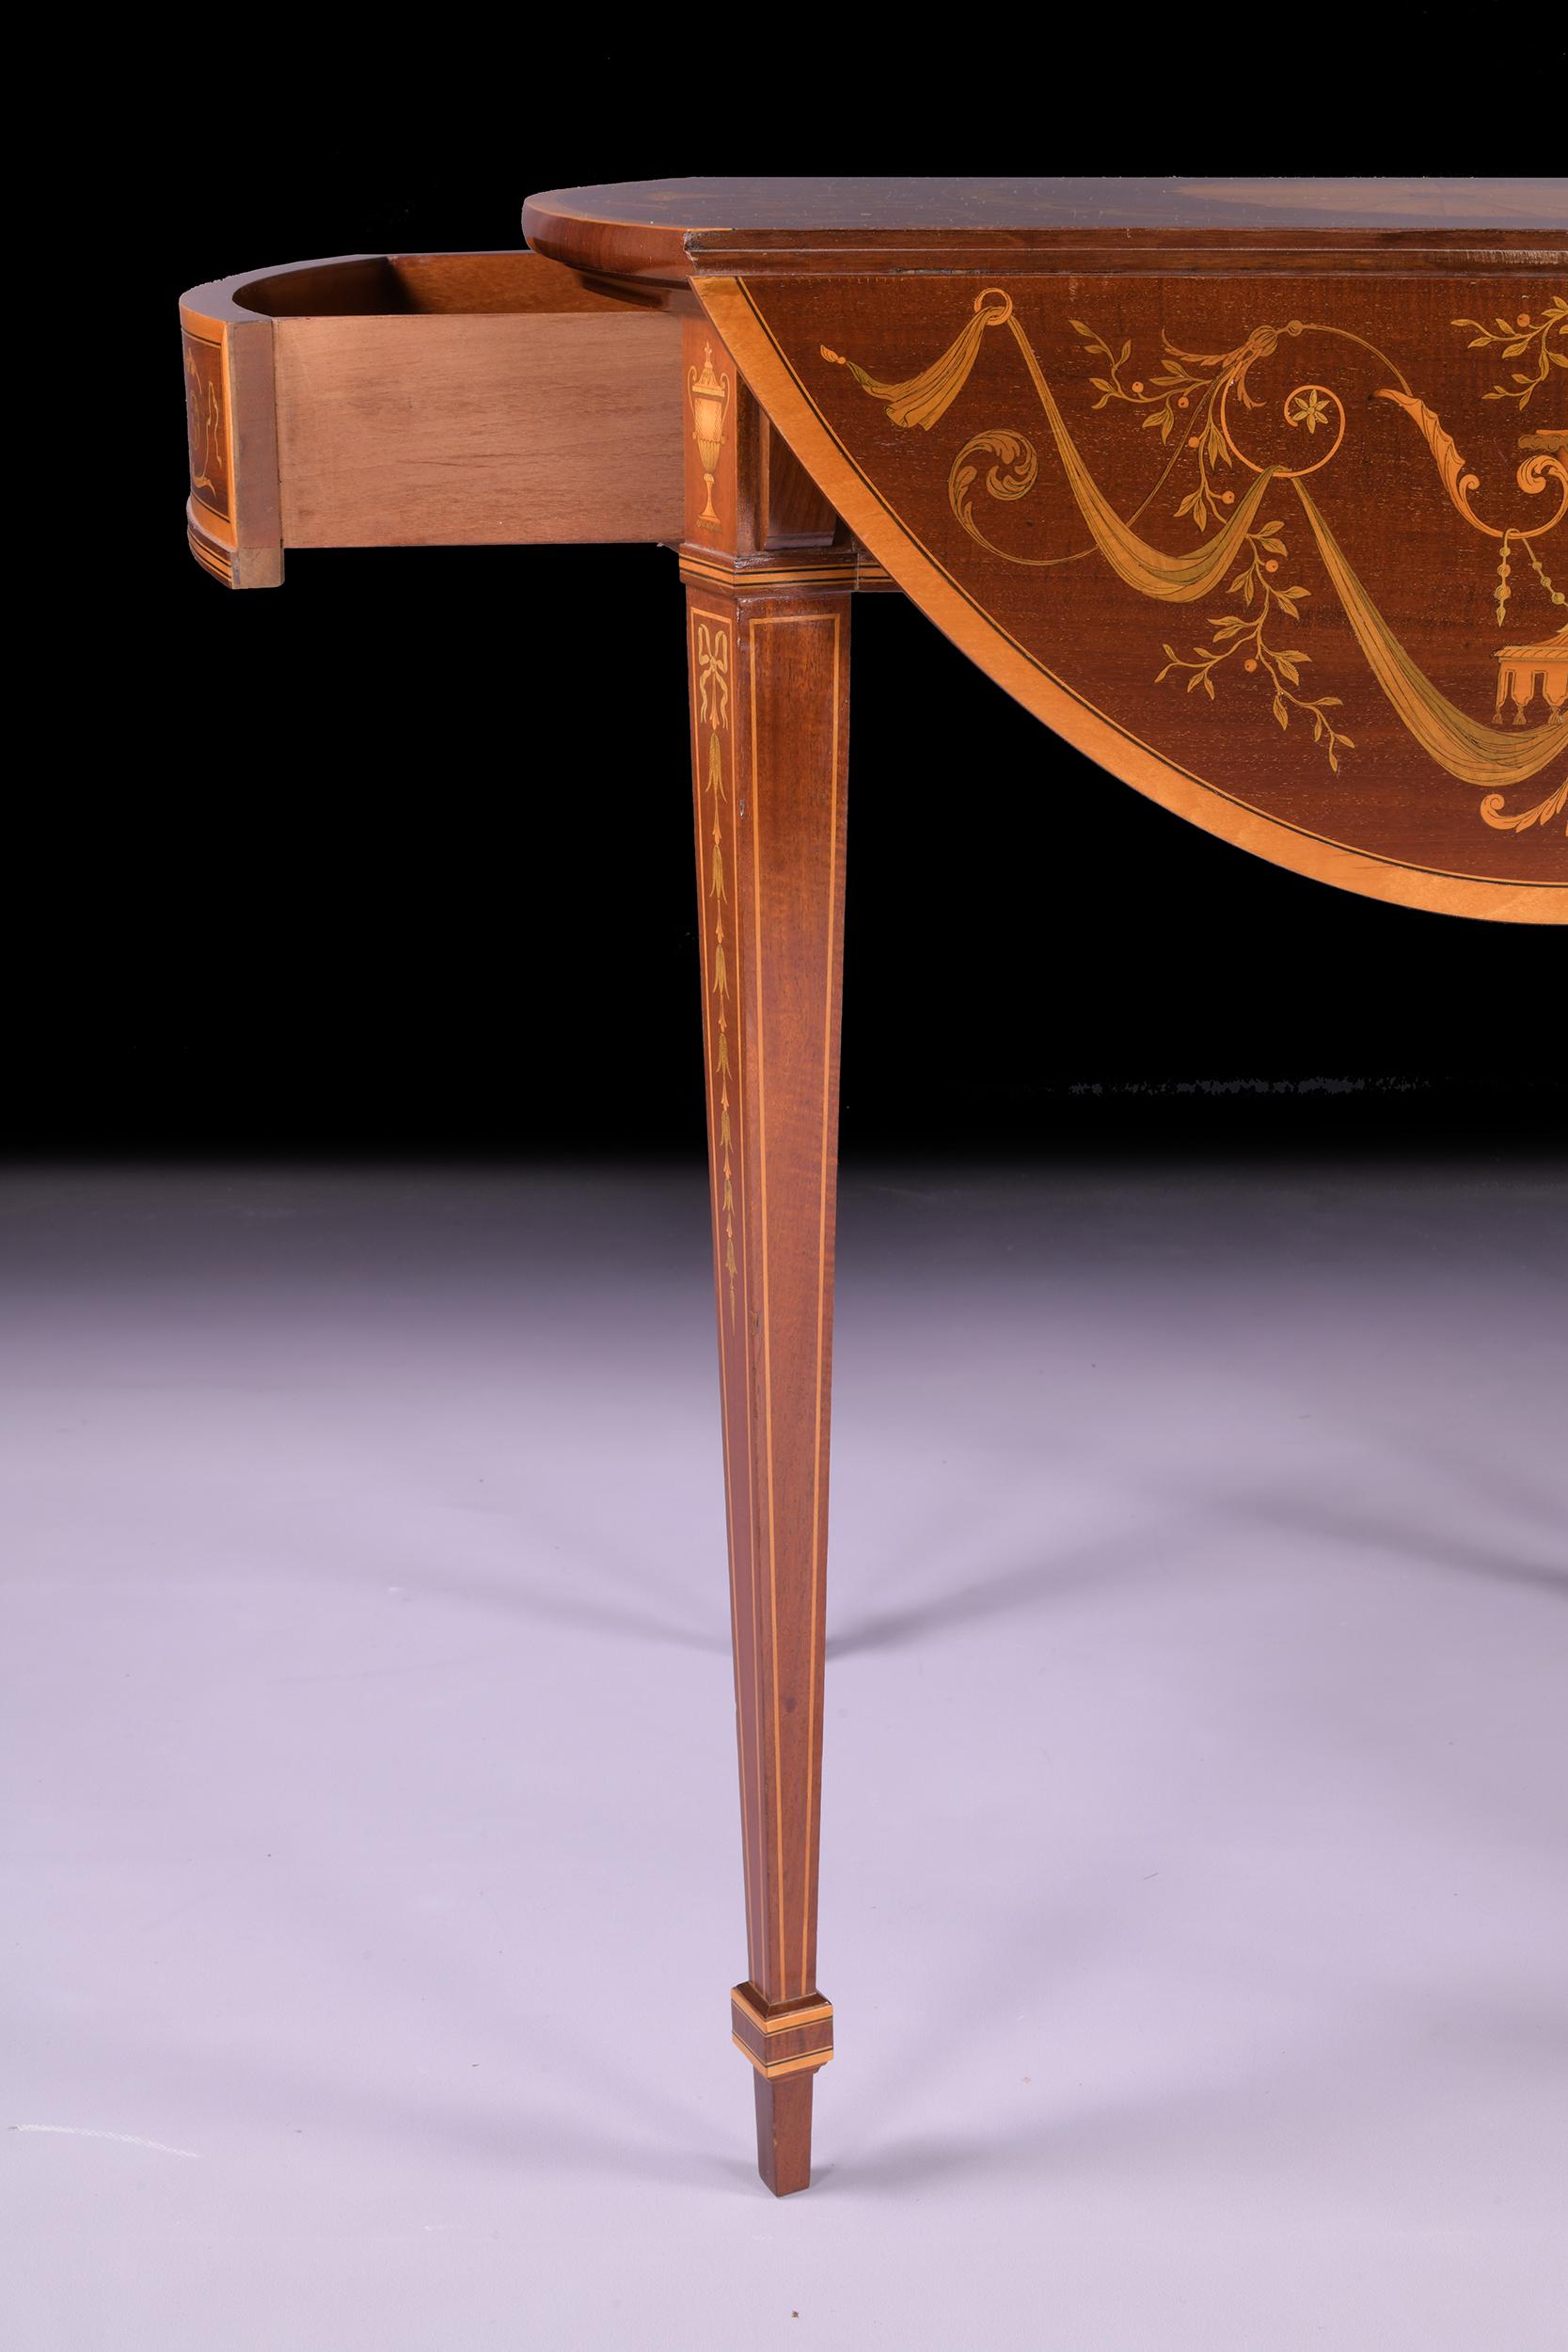 Late 19th Century English Edwardian Satinwood Pembroke Table By Edwards & Robert For Sale 5